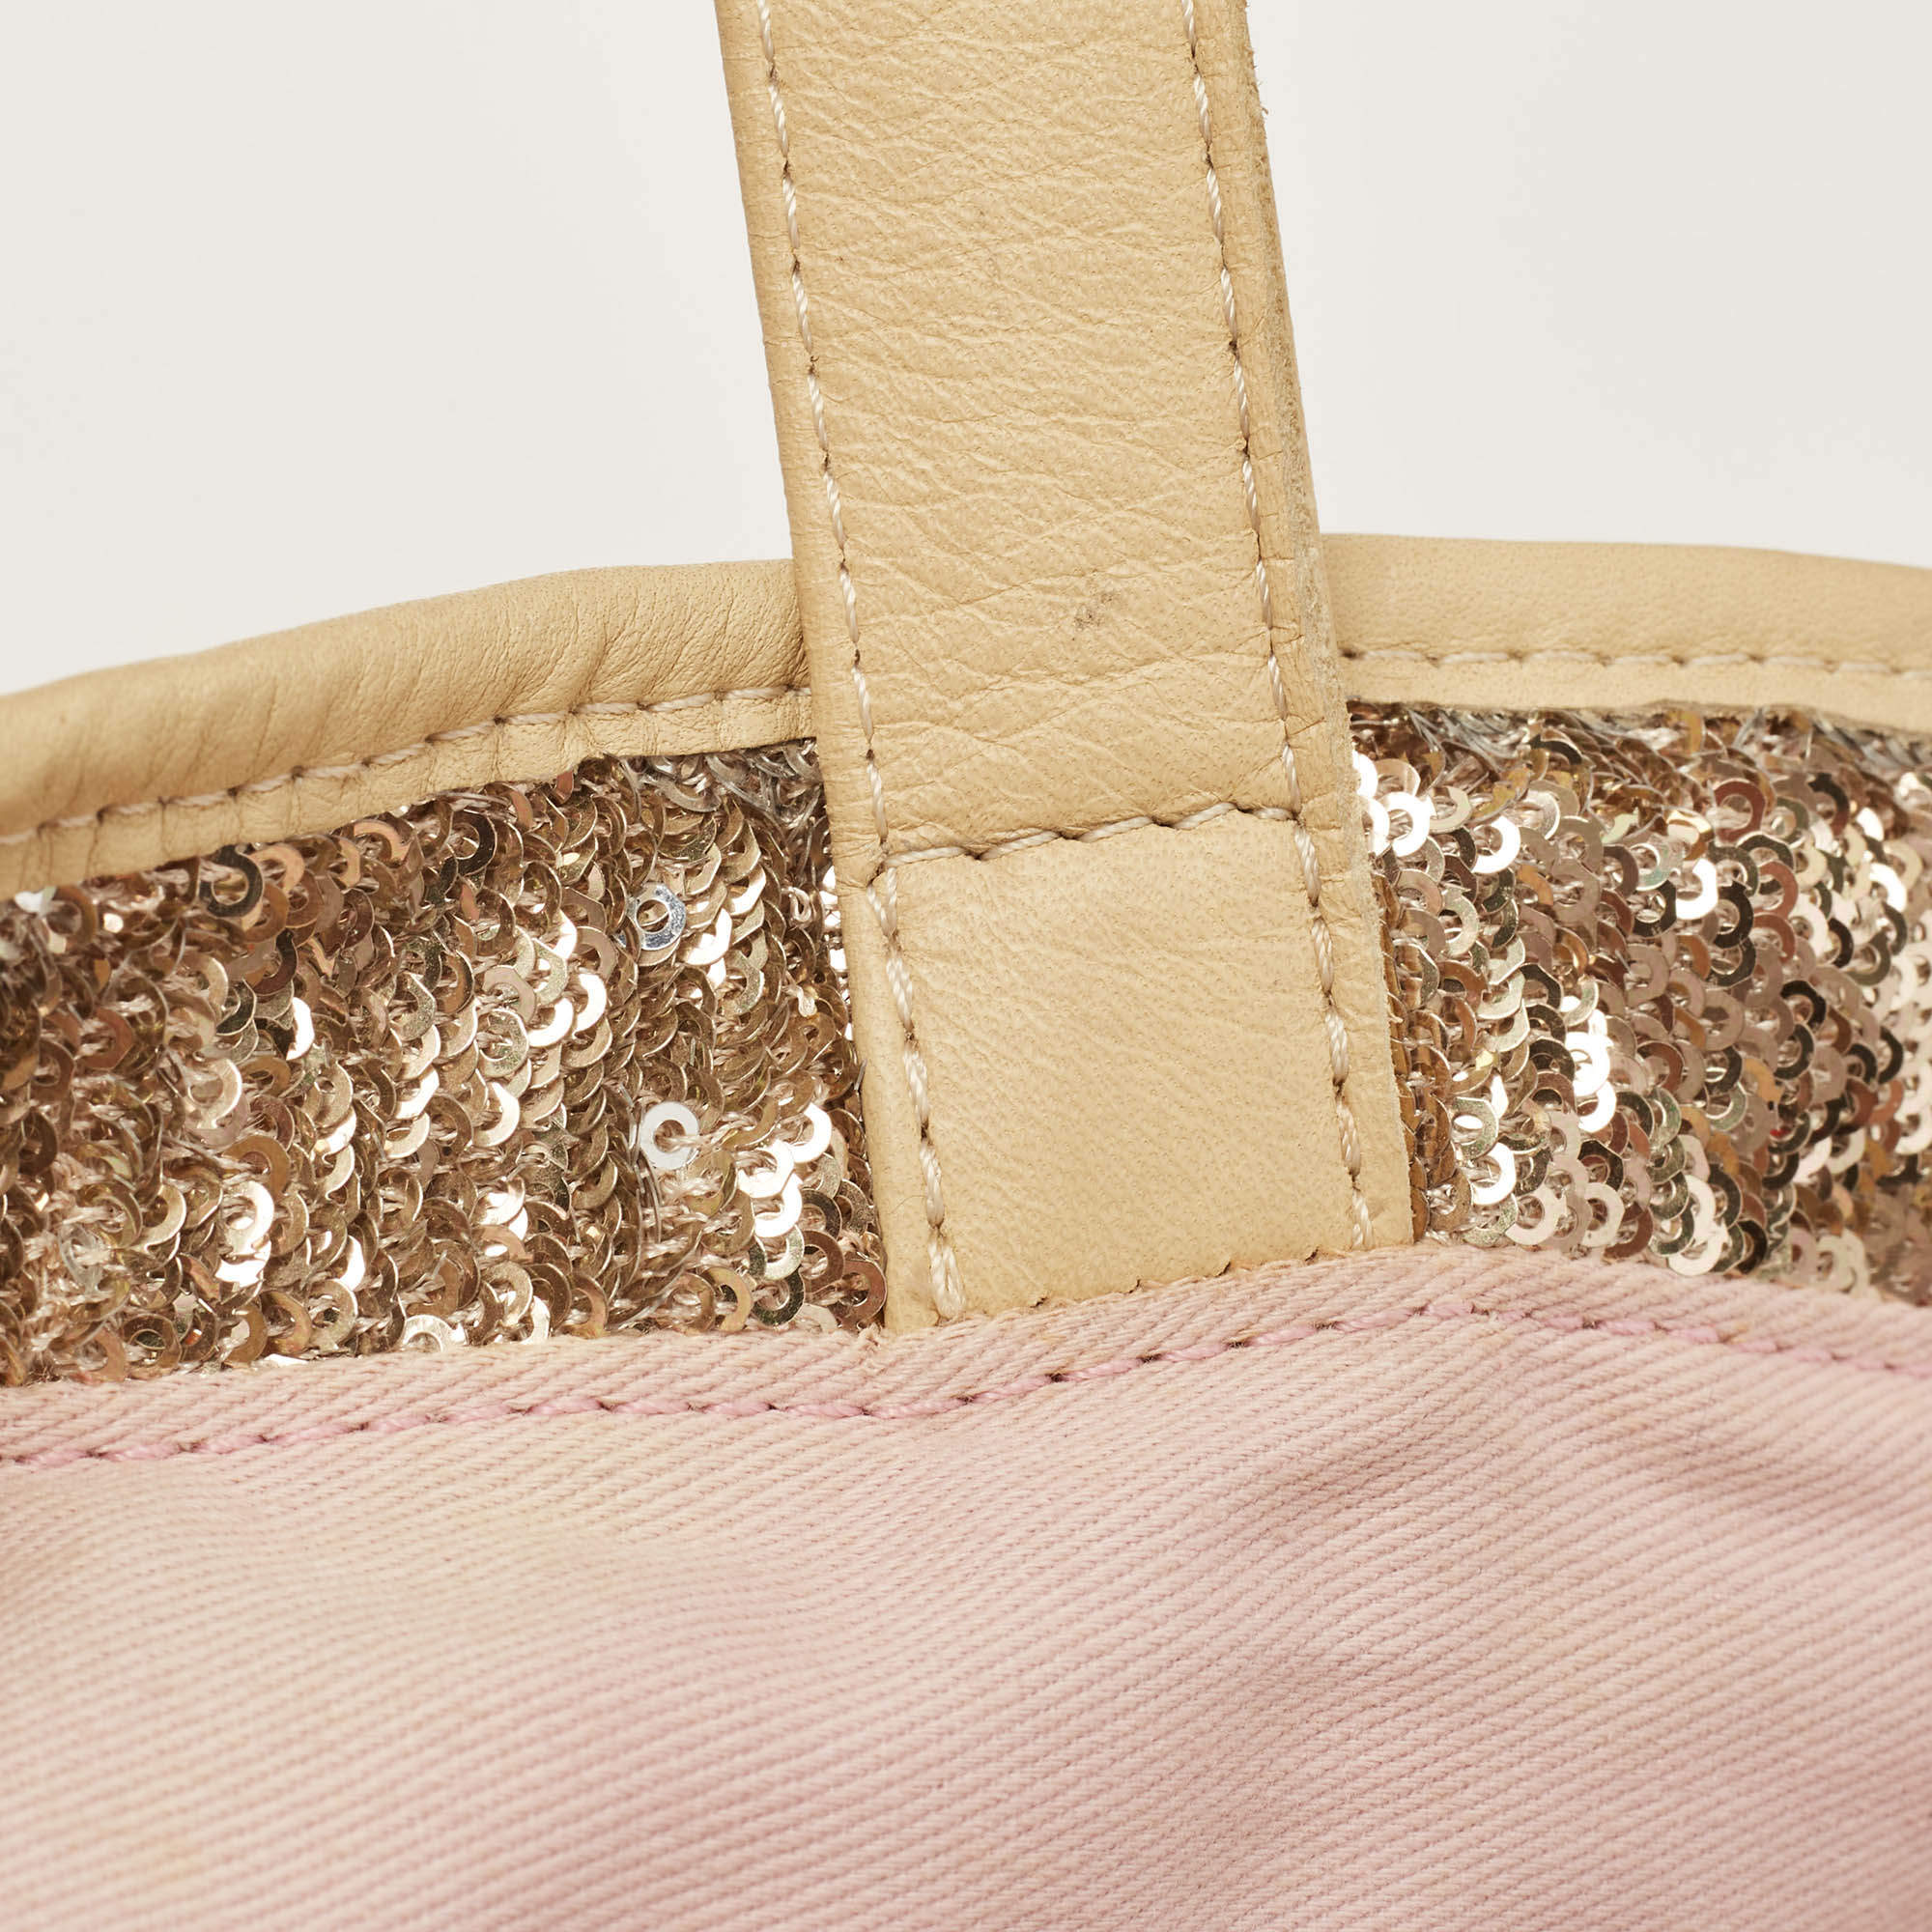 Red Valentino Gold Sequin Ruffle Tote – Ladybag International